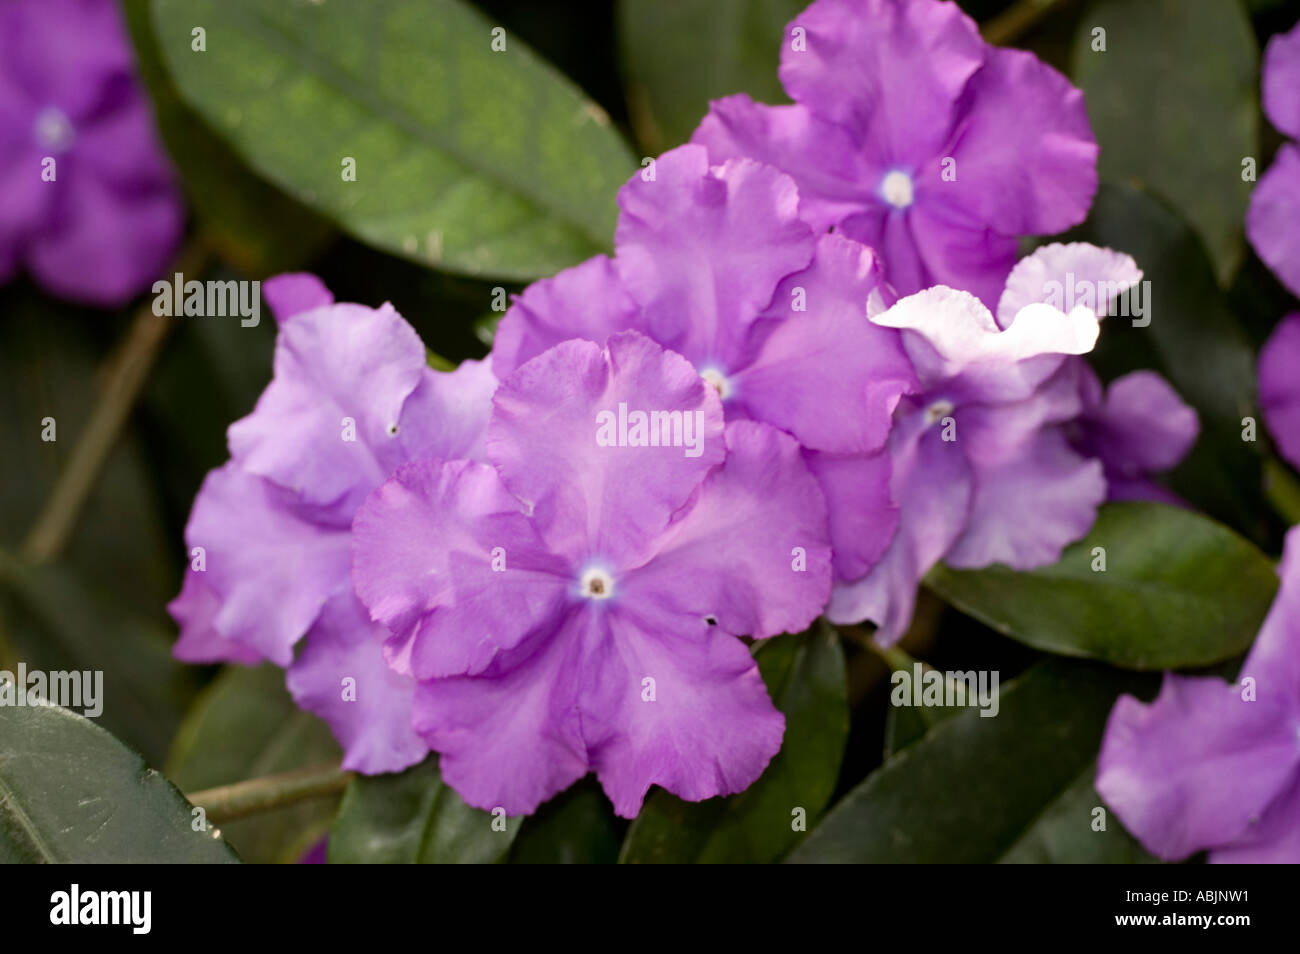 Violet flower common name Yesterday Today and Tomorrow flower latin name Brunfelsia pauciflora var calycina Stock Photo